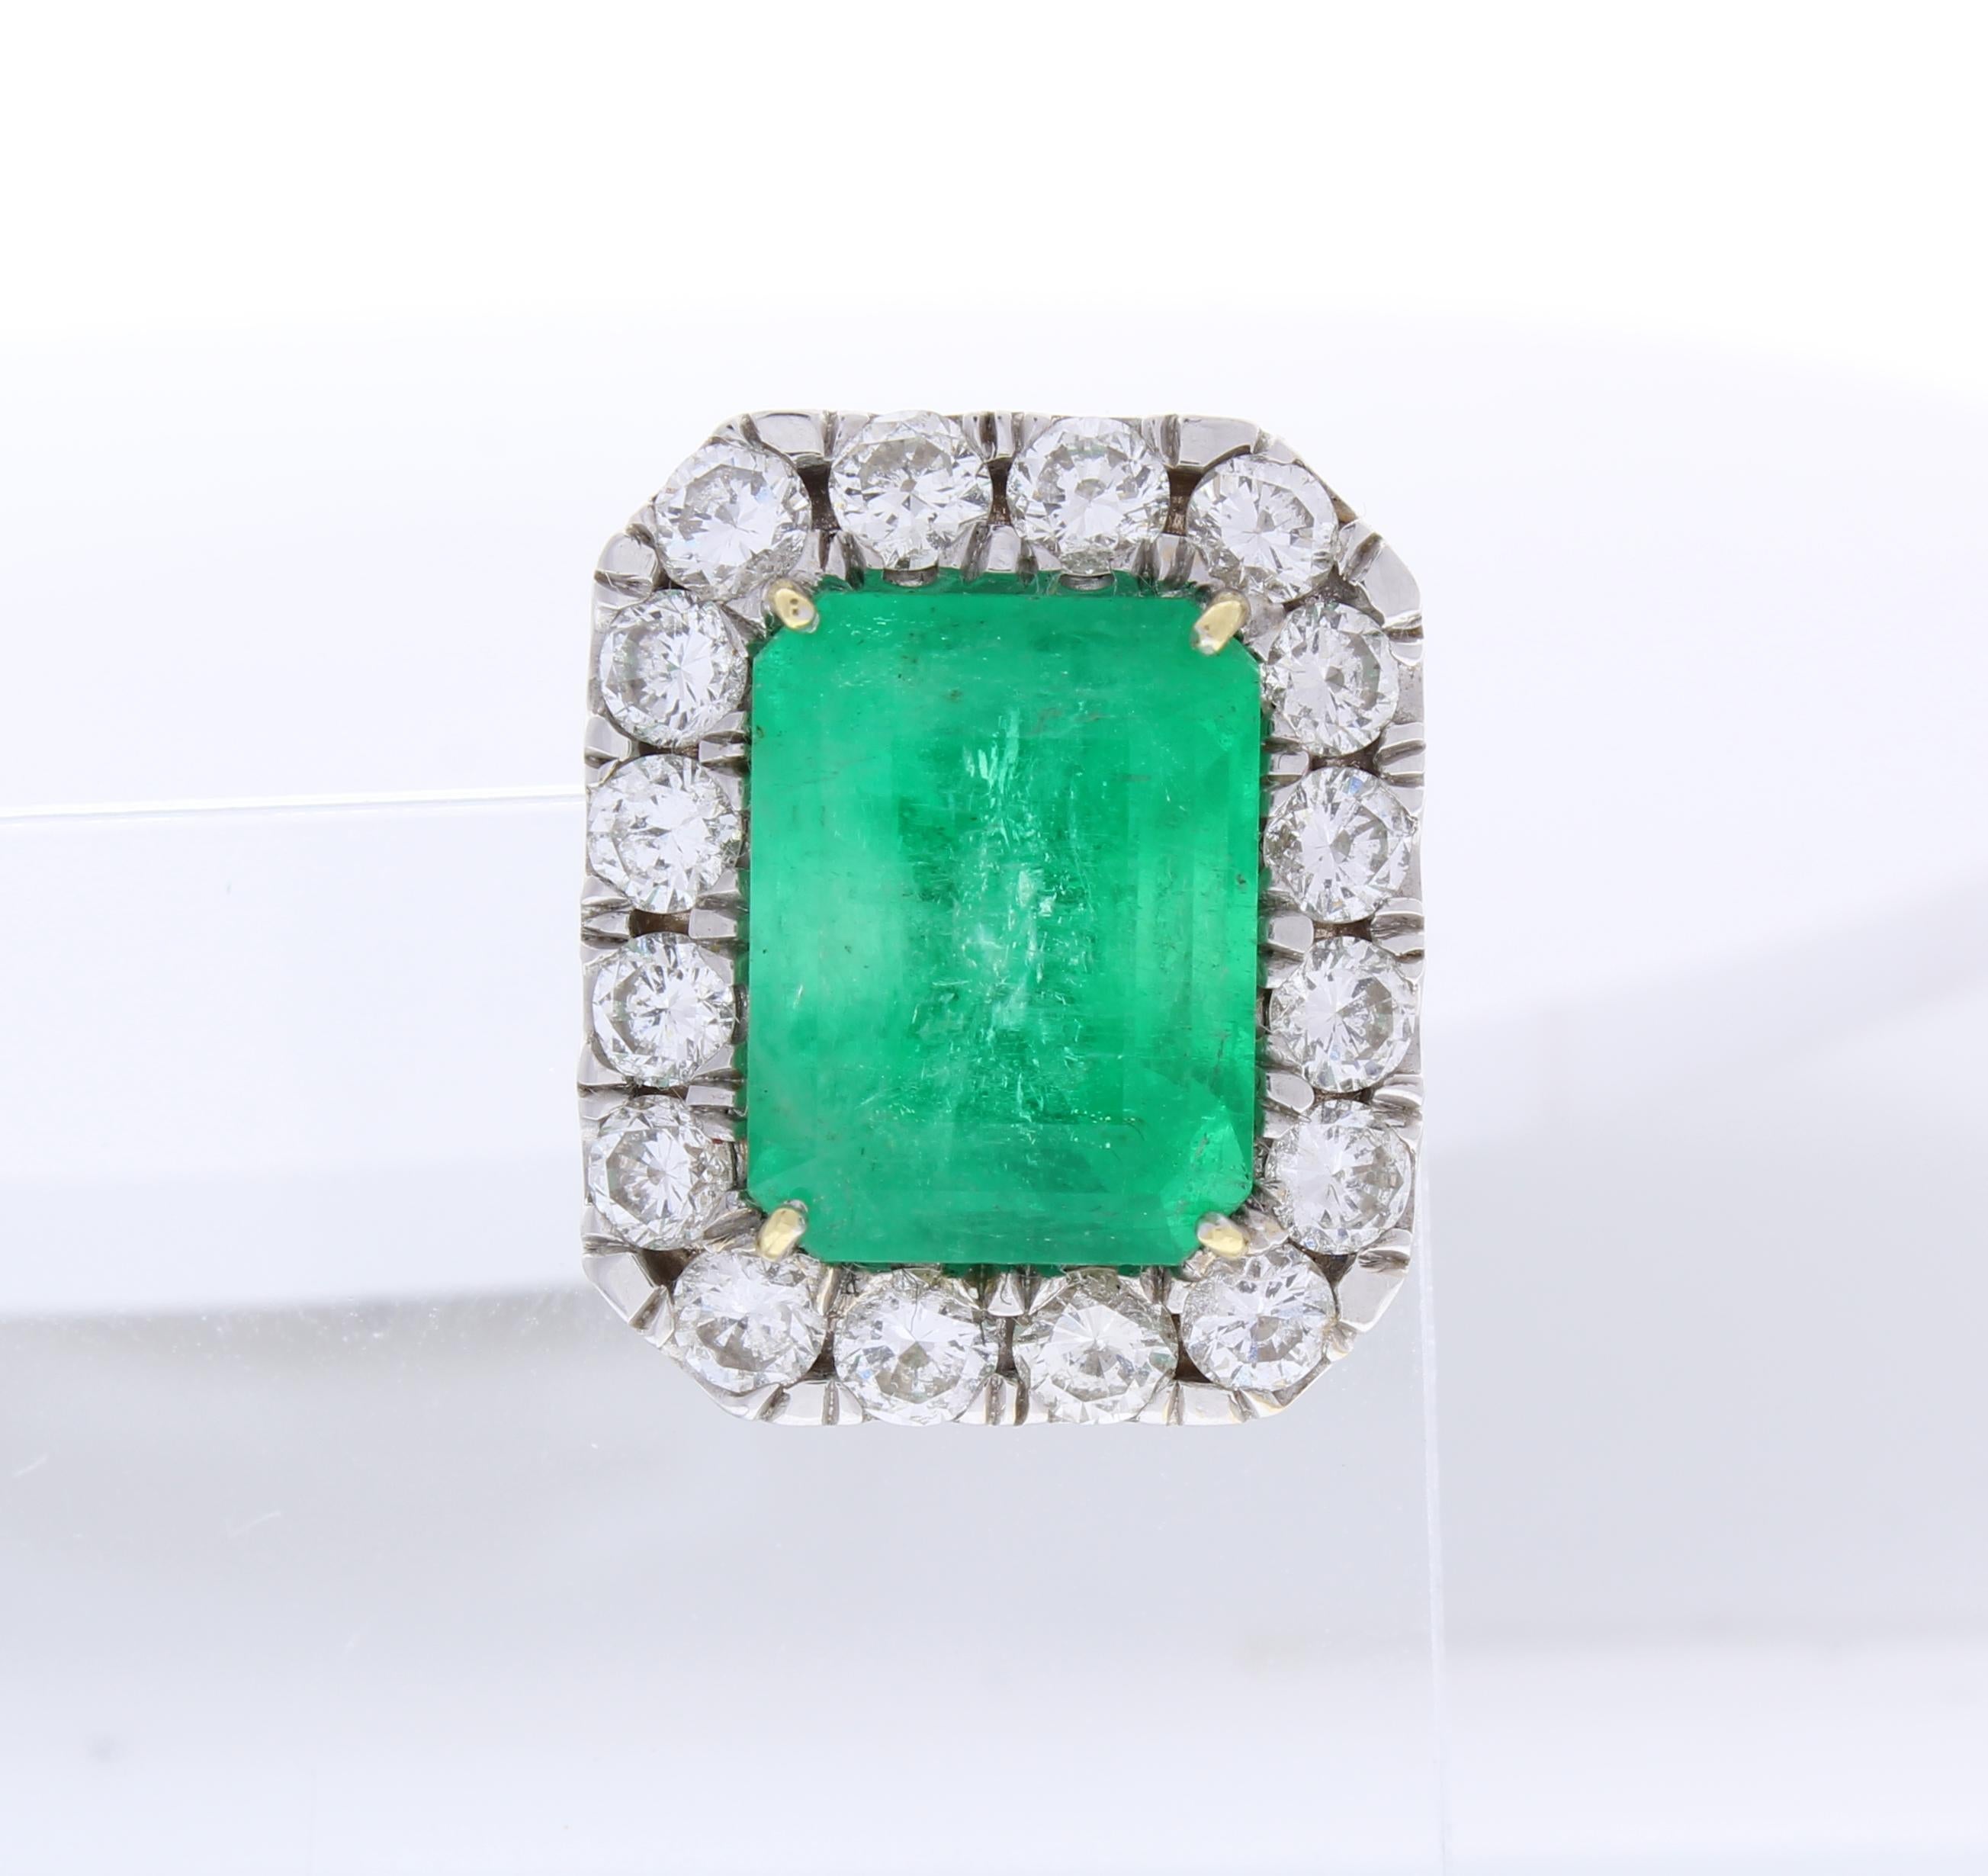 Elevate your look with a bold pop of color when you pair these exquisite emerald and diamond fancy stud earrings to your ensemble. The earrings feature attractive 11.36 carat total weight, green emeralds. These perfectly matched gemstones are